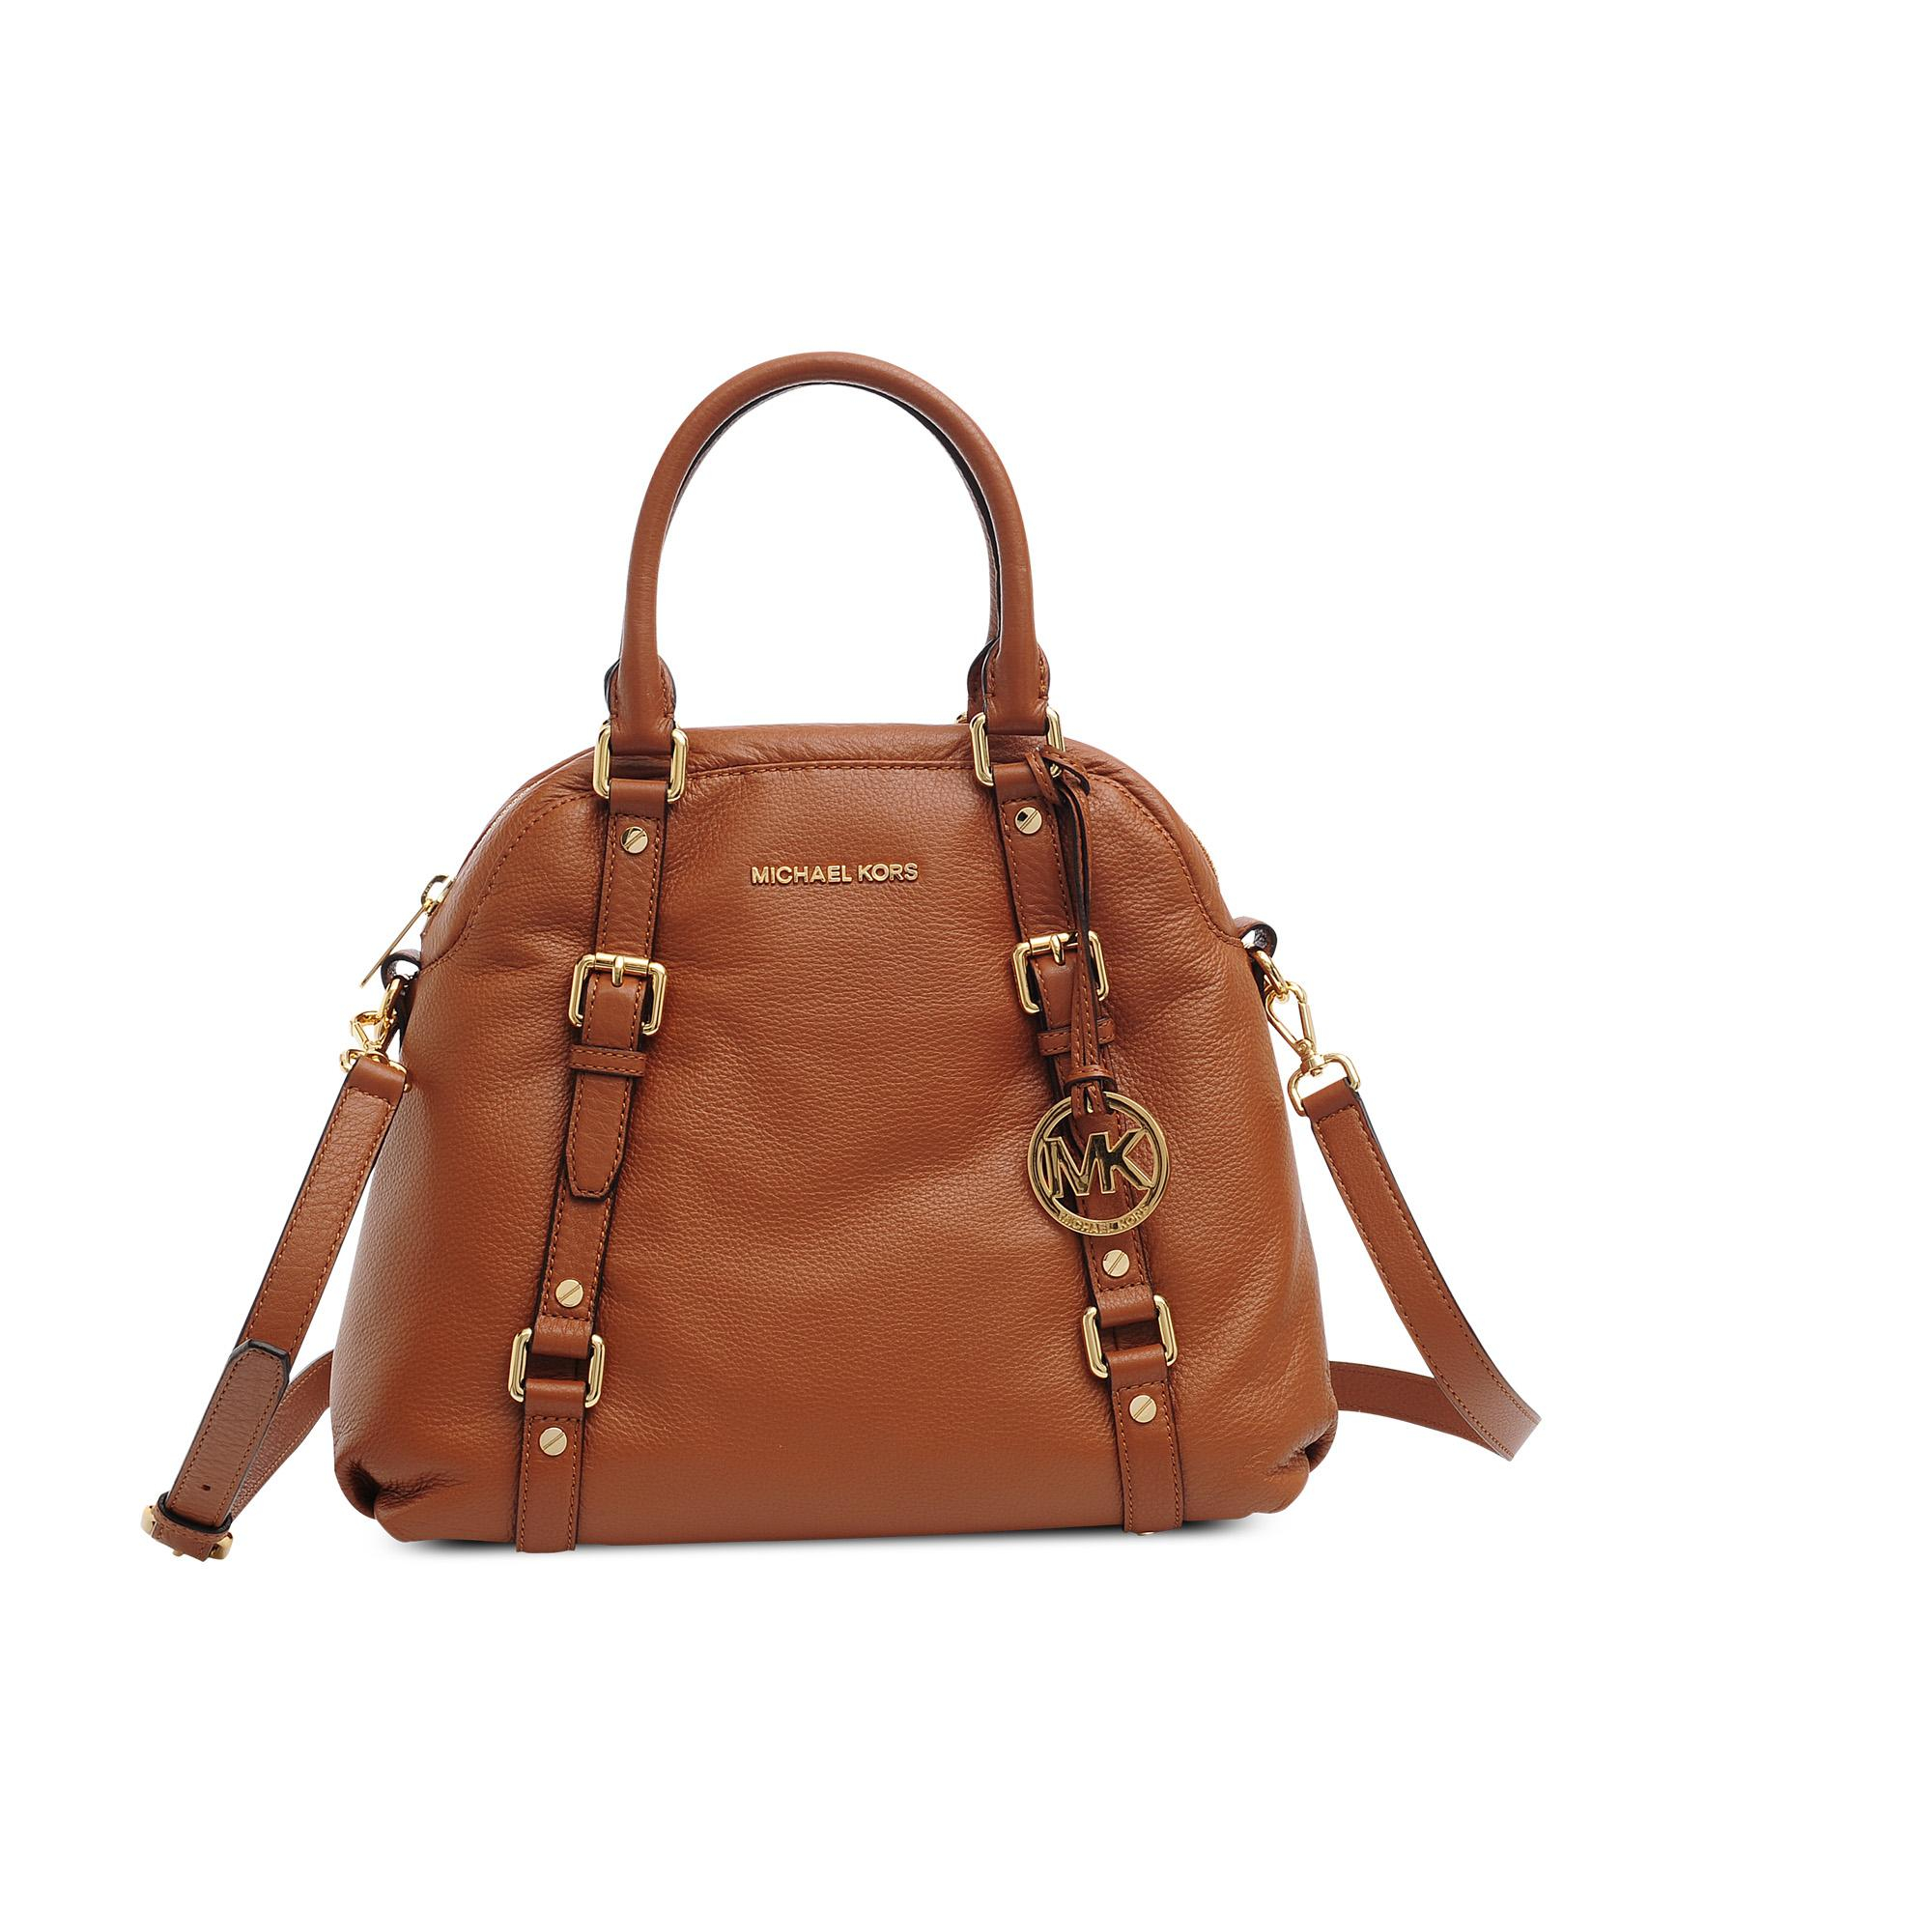 Michael Kors Bedford Dome Leather Satchel in Brown | Lyst